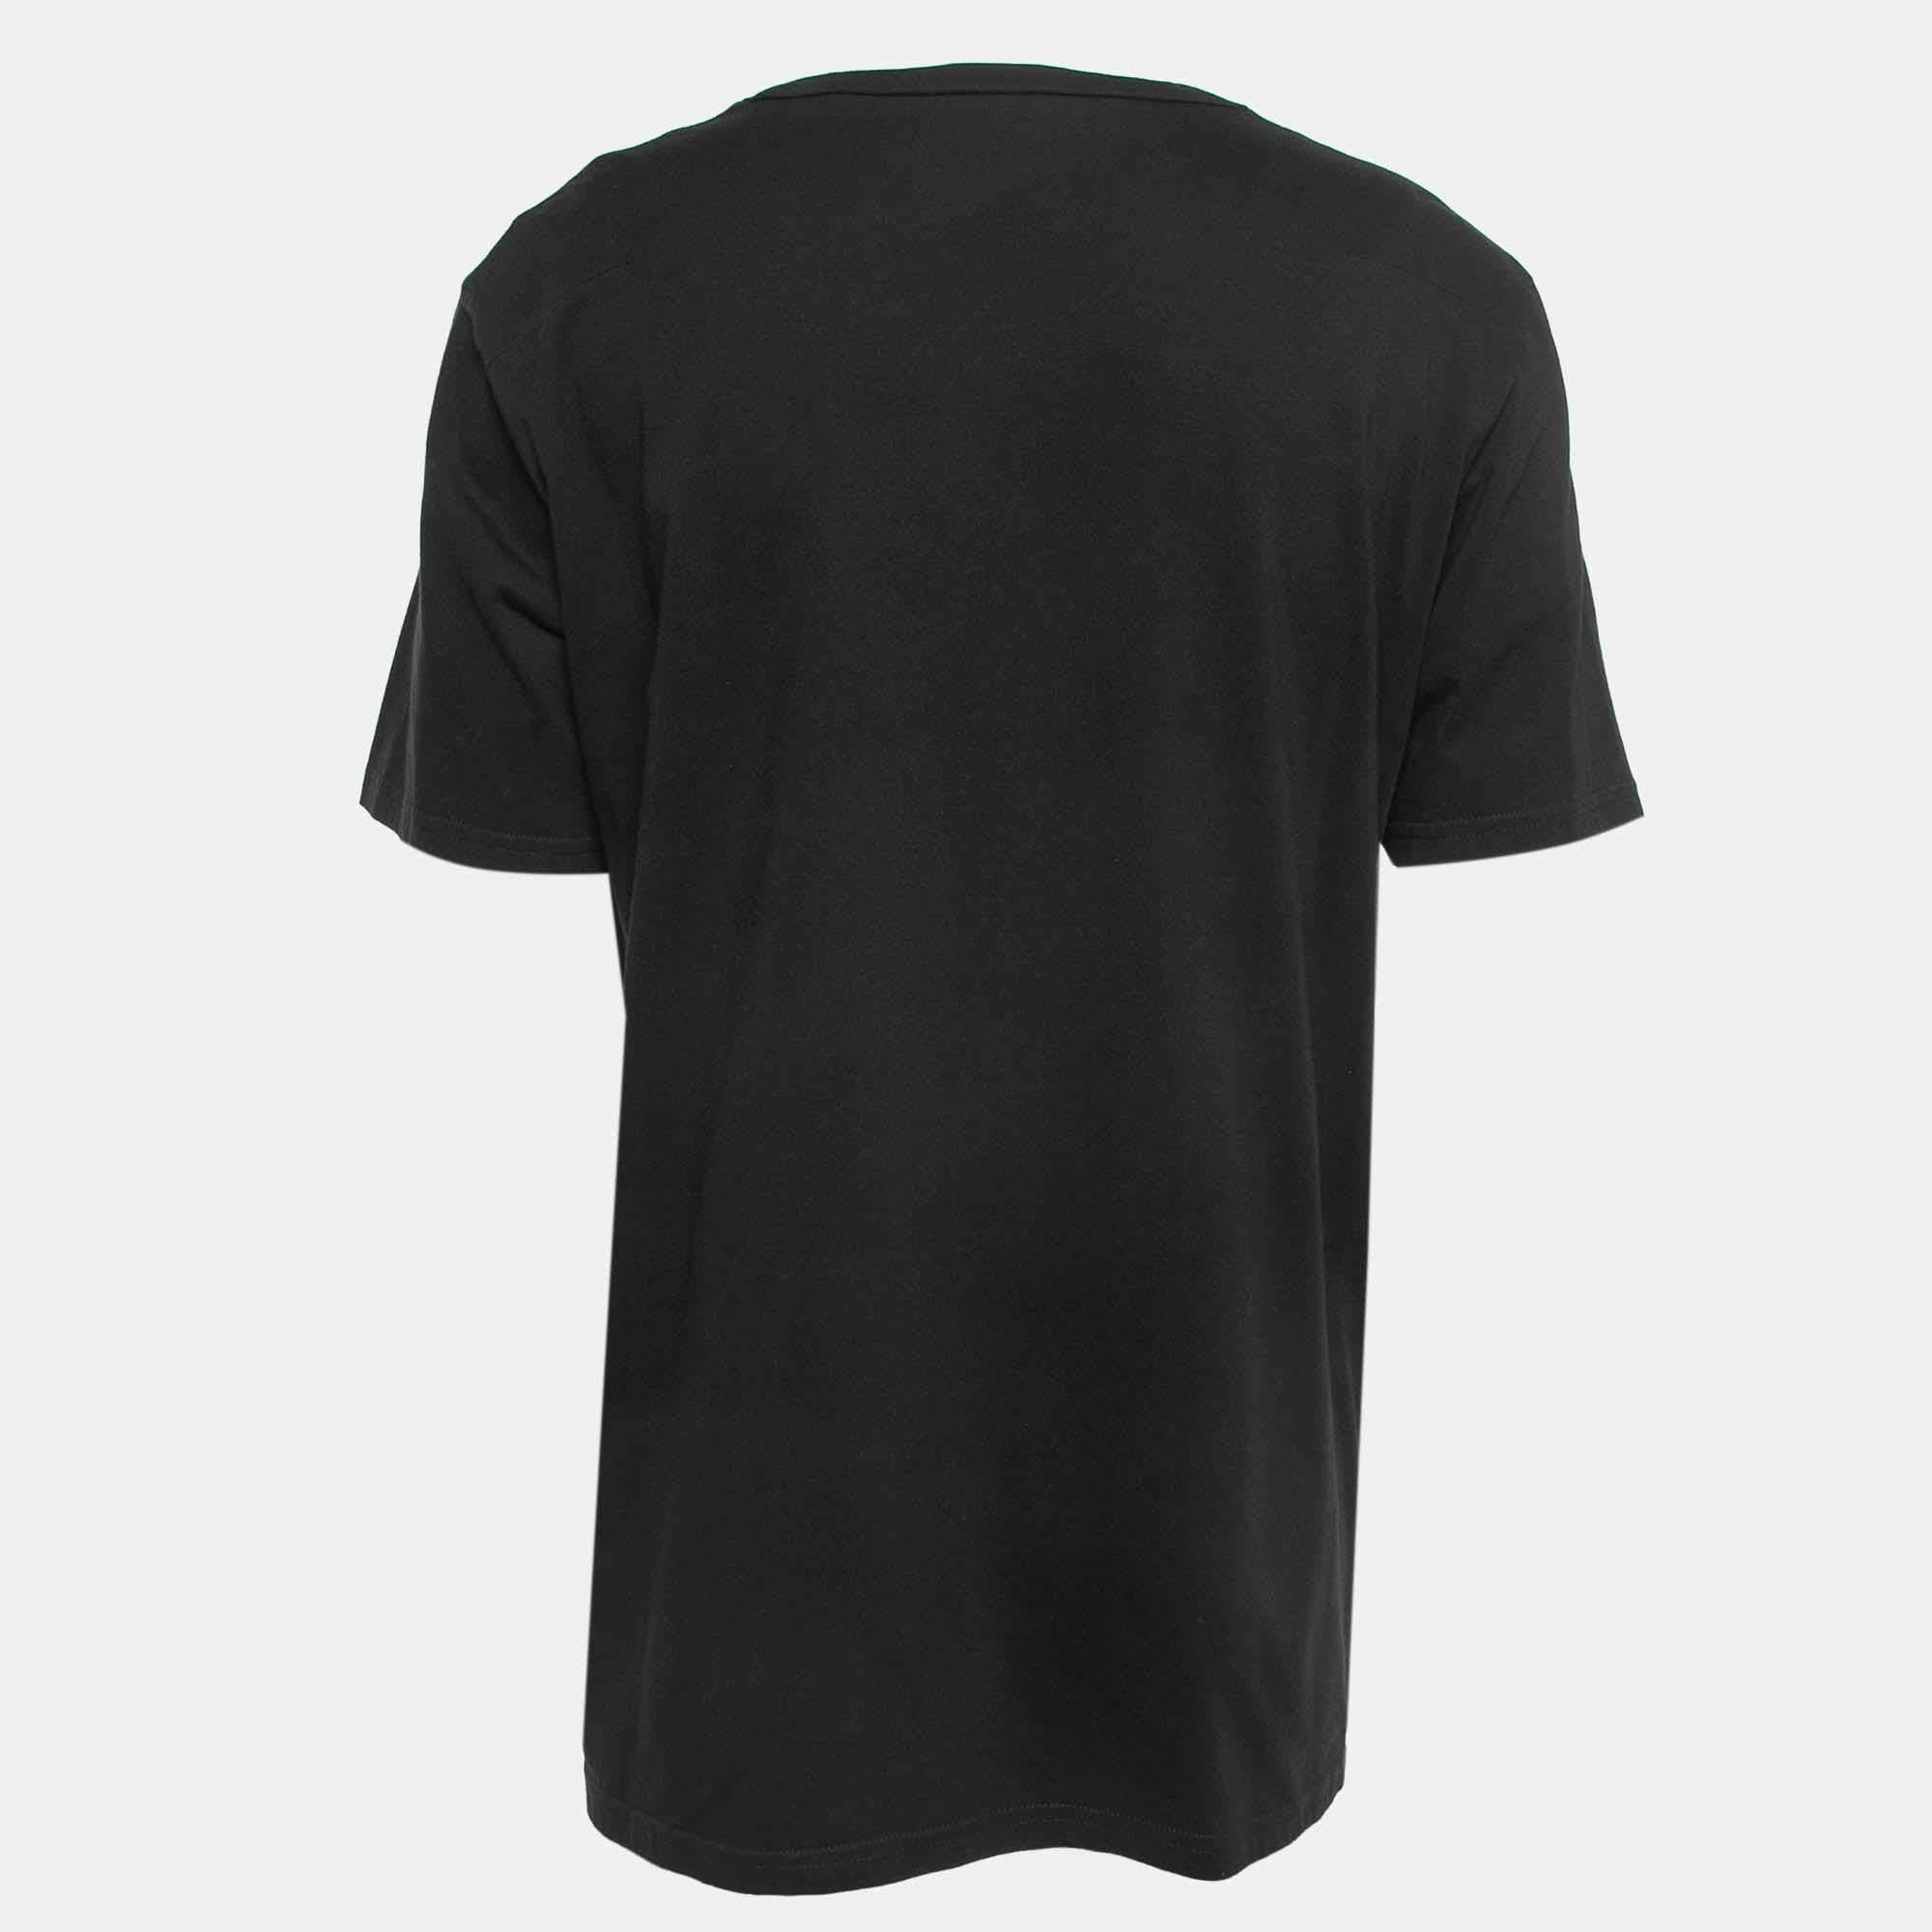 Get the style you desire as well as the comfort you need with this short-sleeve T-shirt from Dior. Made from cotton, the black T-shirt is enhanced with an embroidered bee.

